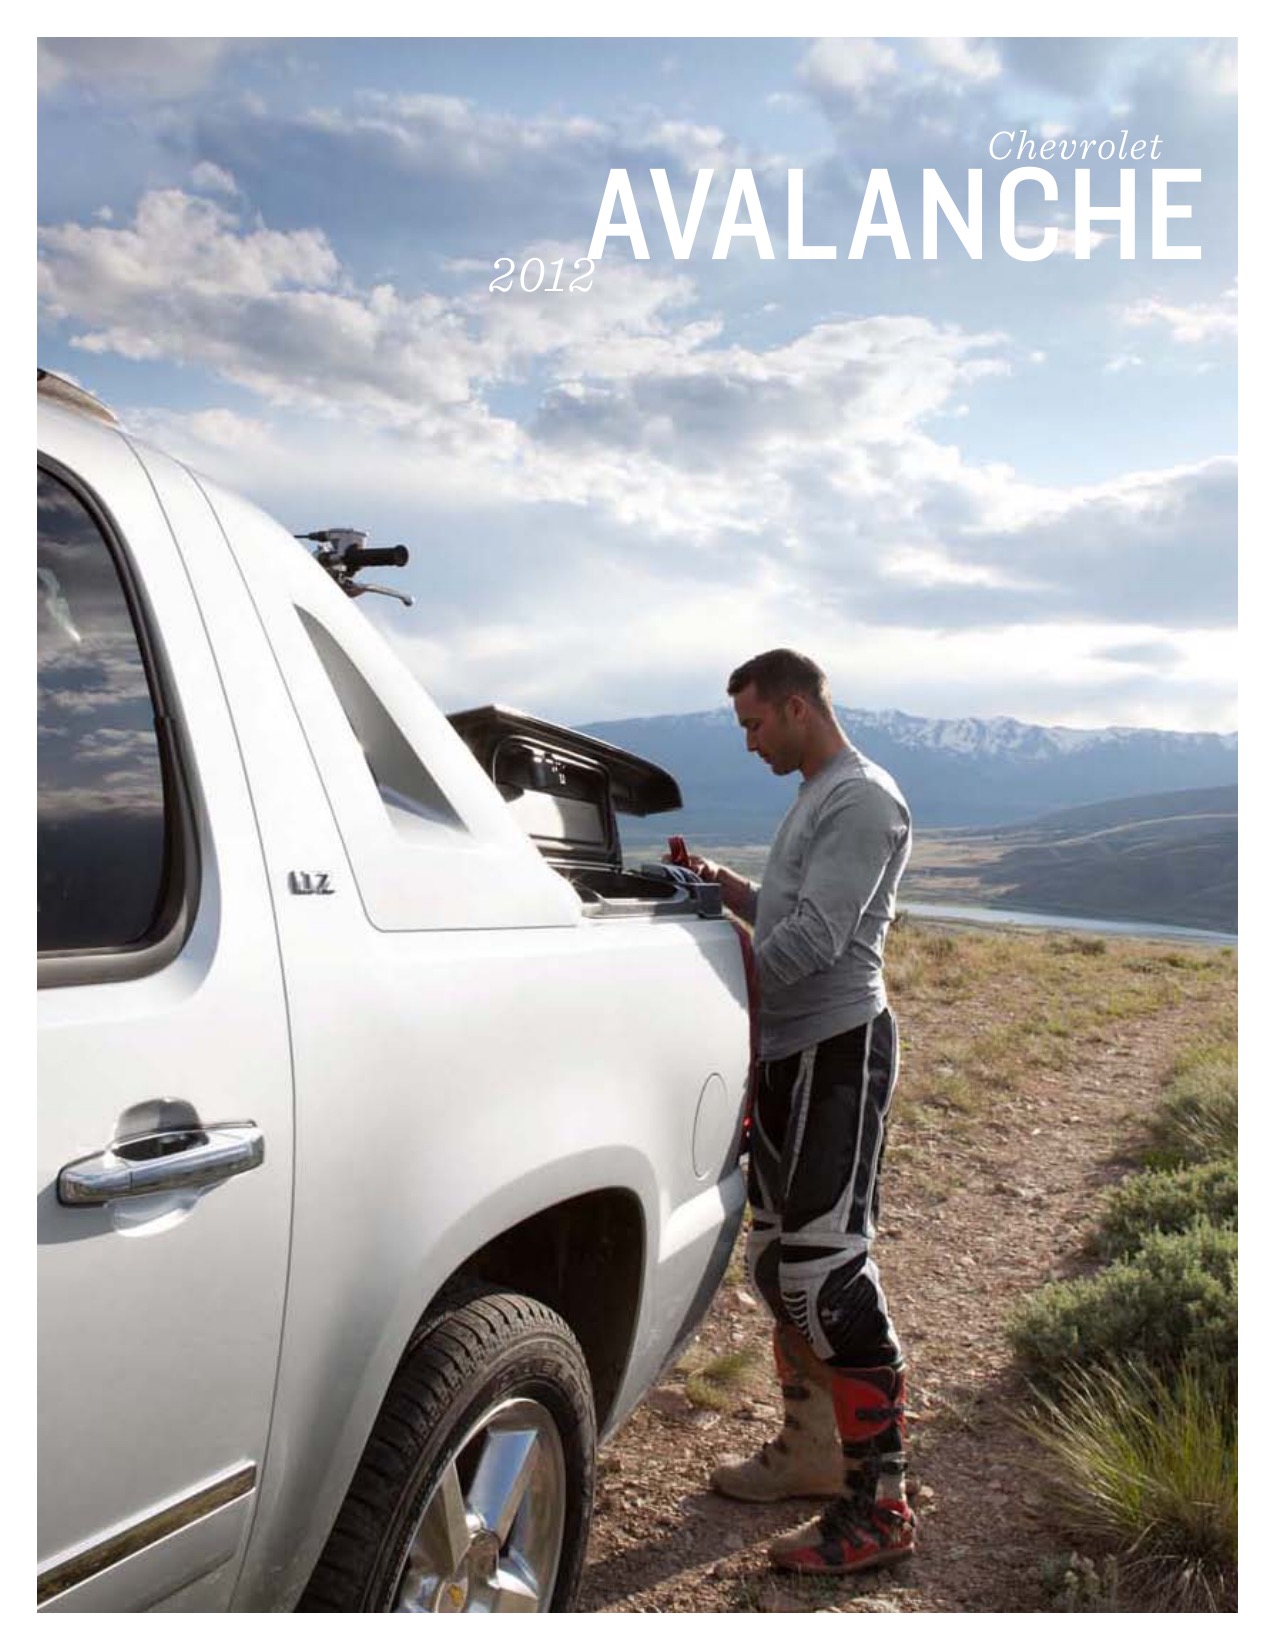 2012 Chevrolet Avalanche Brochure Page 1